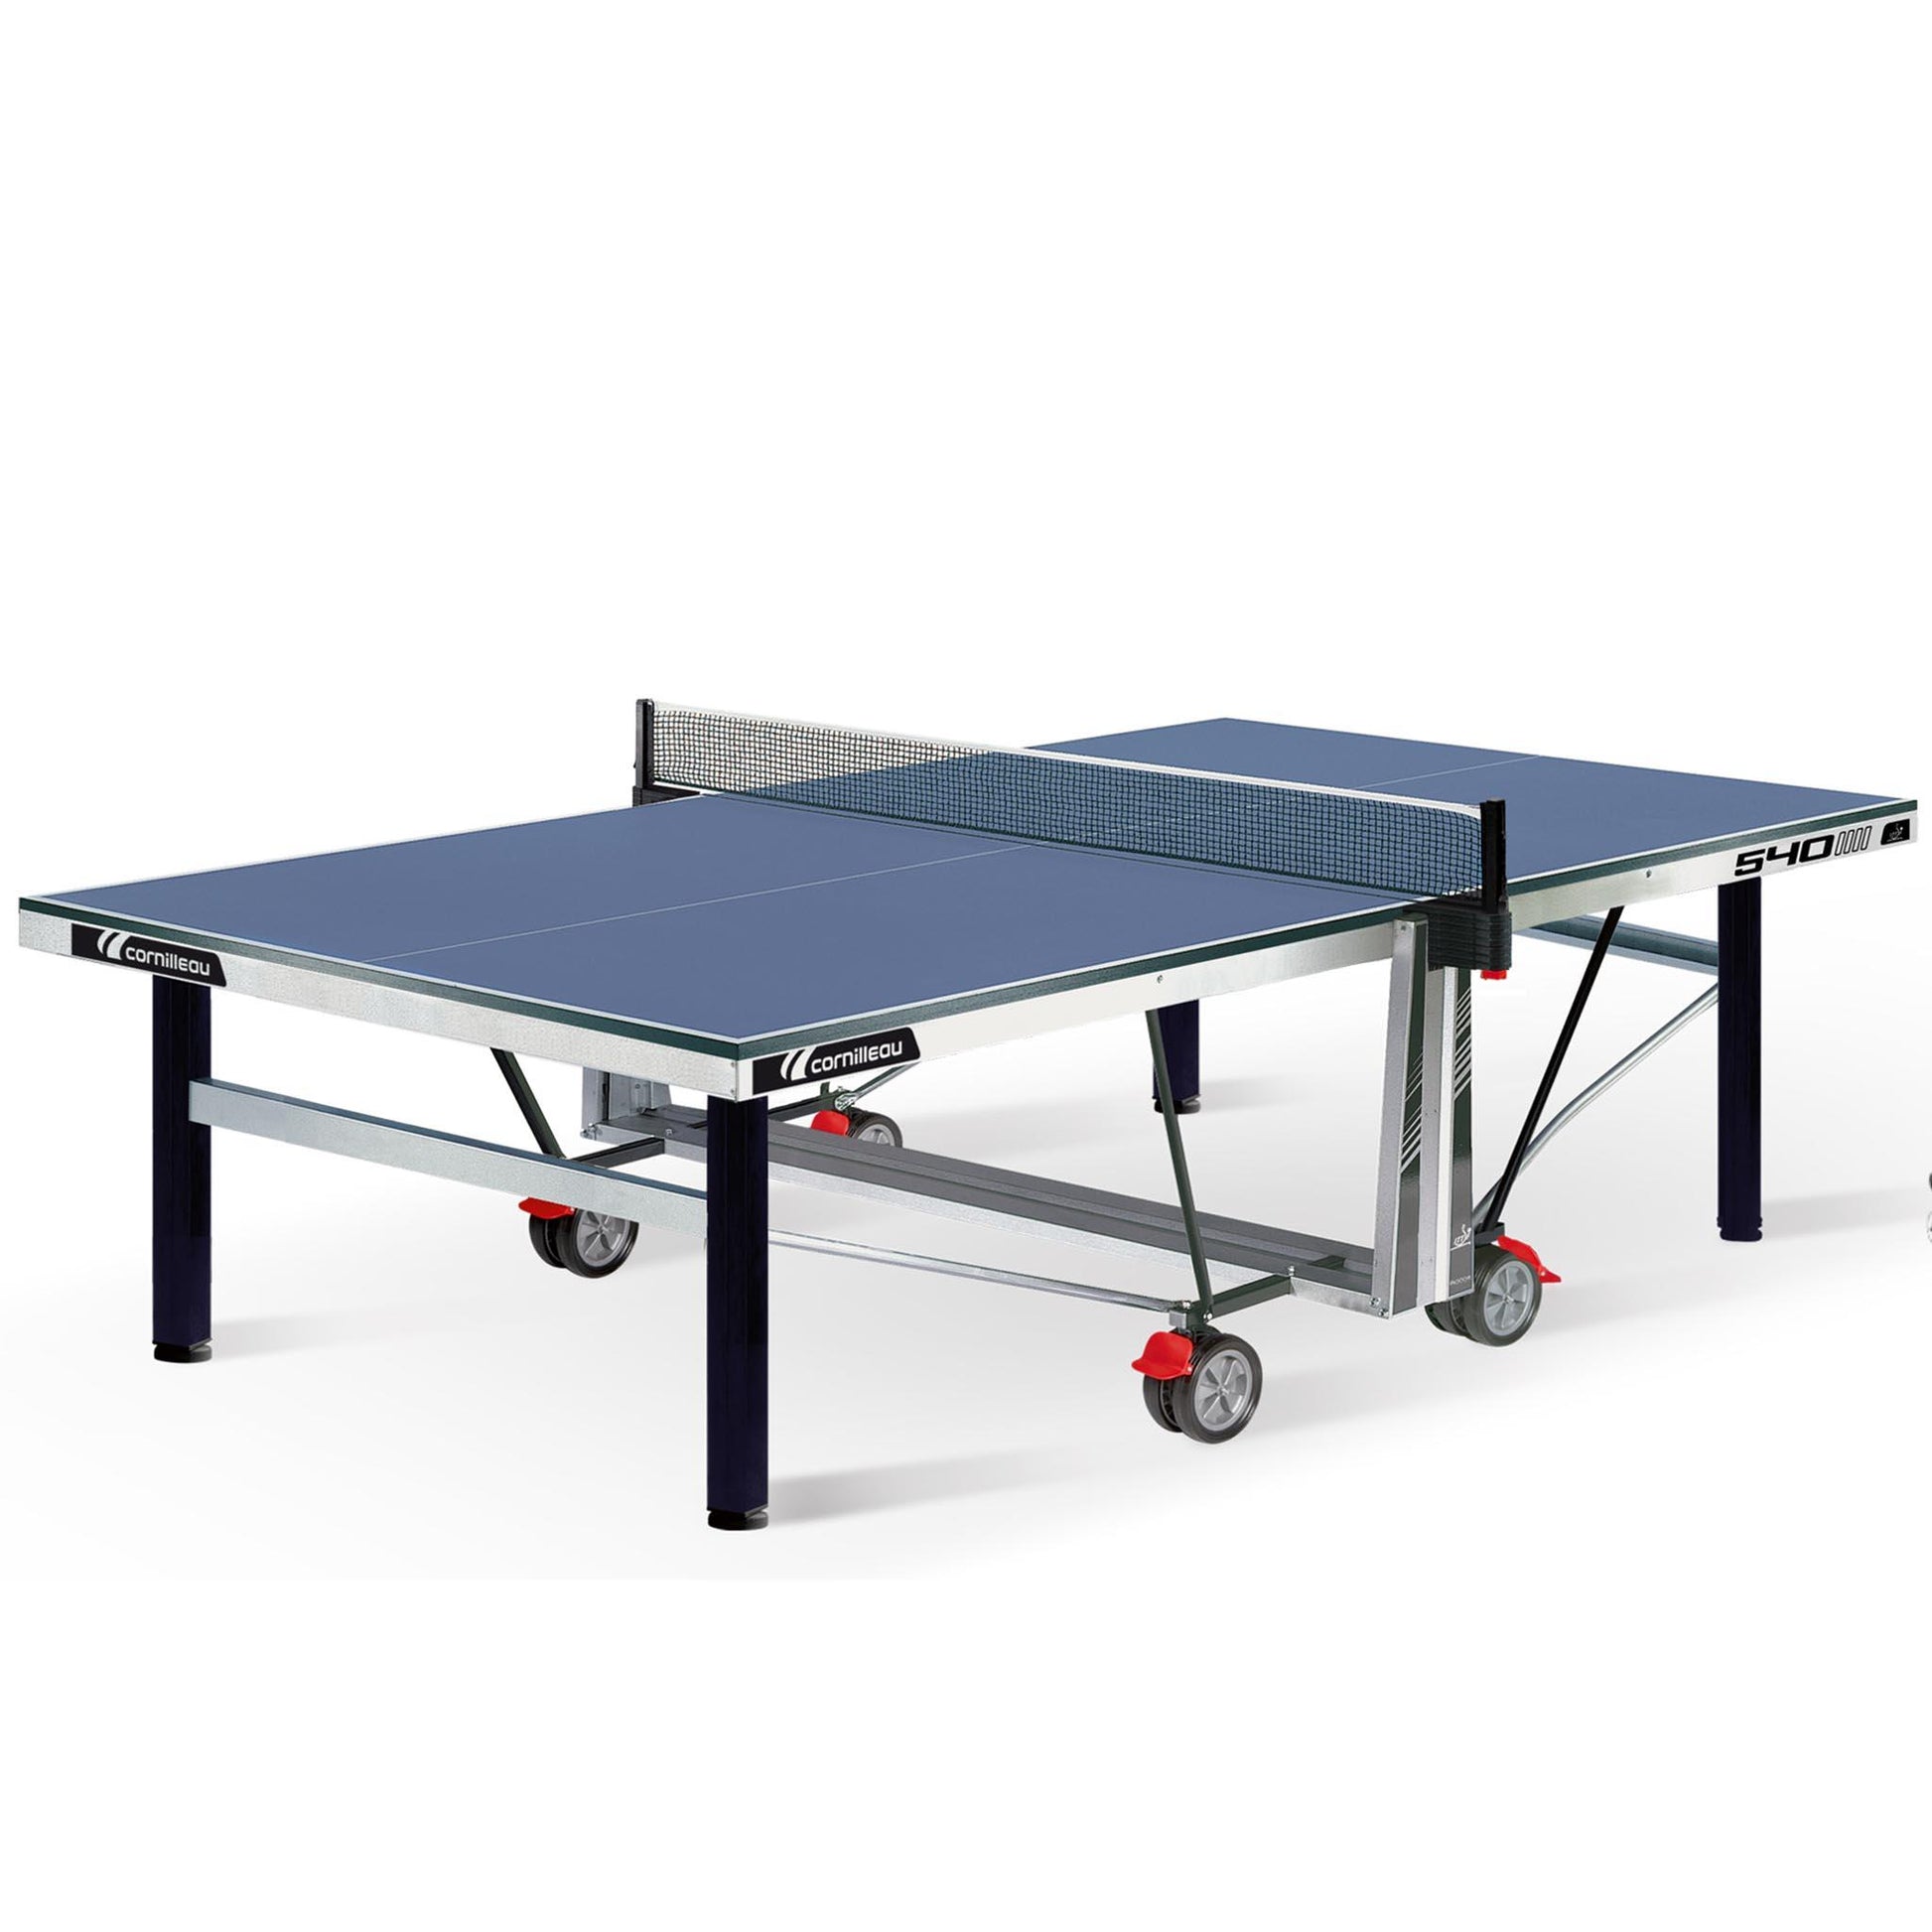 Cornilleau 540 ITTF Indoor Table Tennis Table - Centric Billiard | Hong Kong's Leading Game Room Superstore